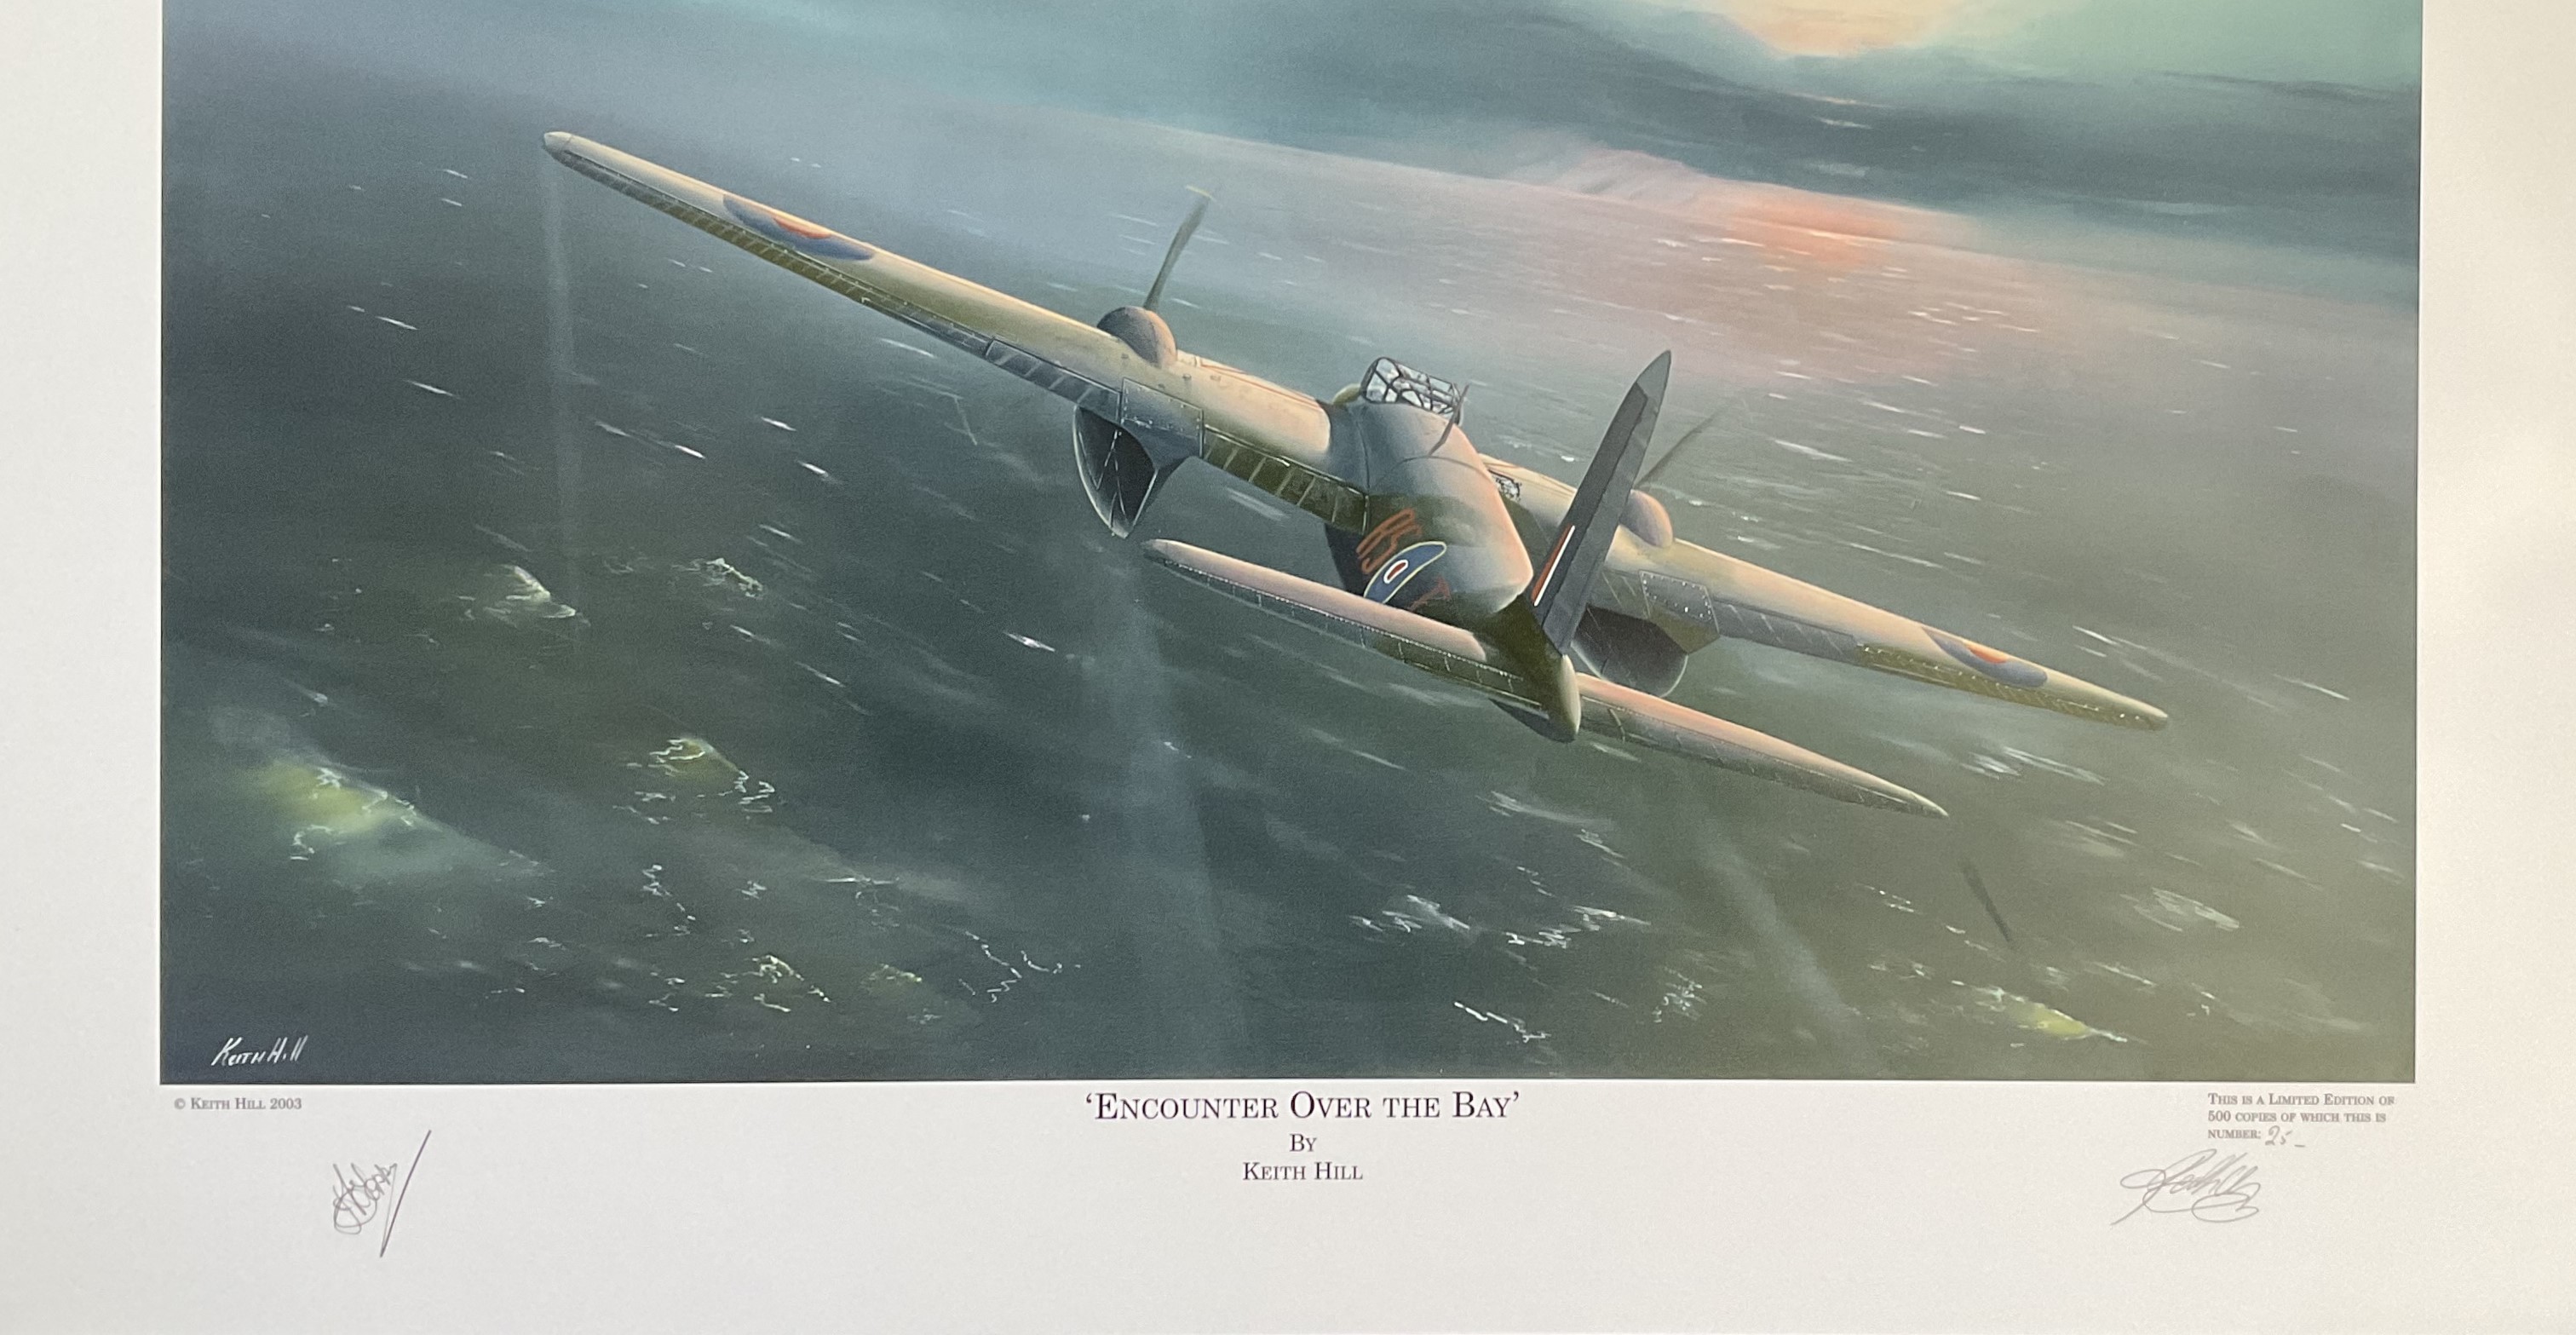 WW2 Colour Print Titled Encounter Over The Bay by Keith Hill. Signed by Keith Hill Artist and Wing - Image 4 of 6